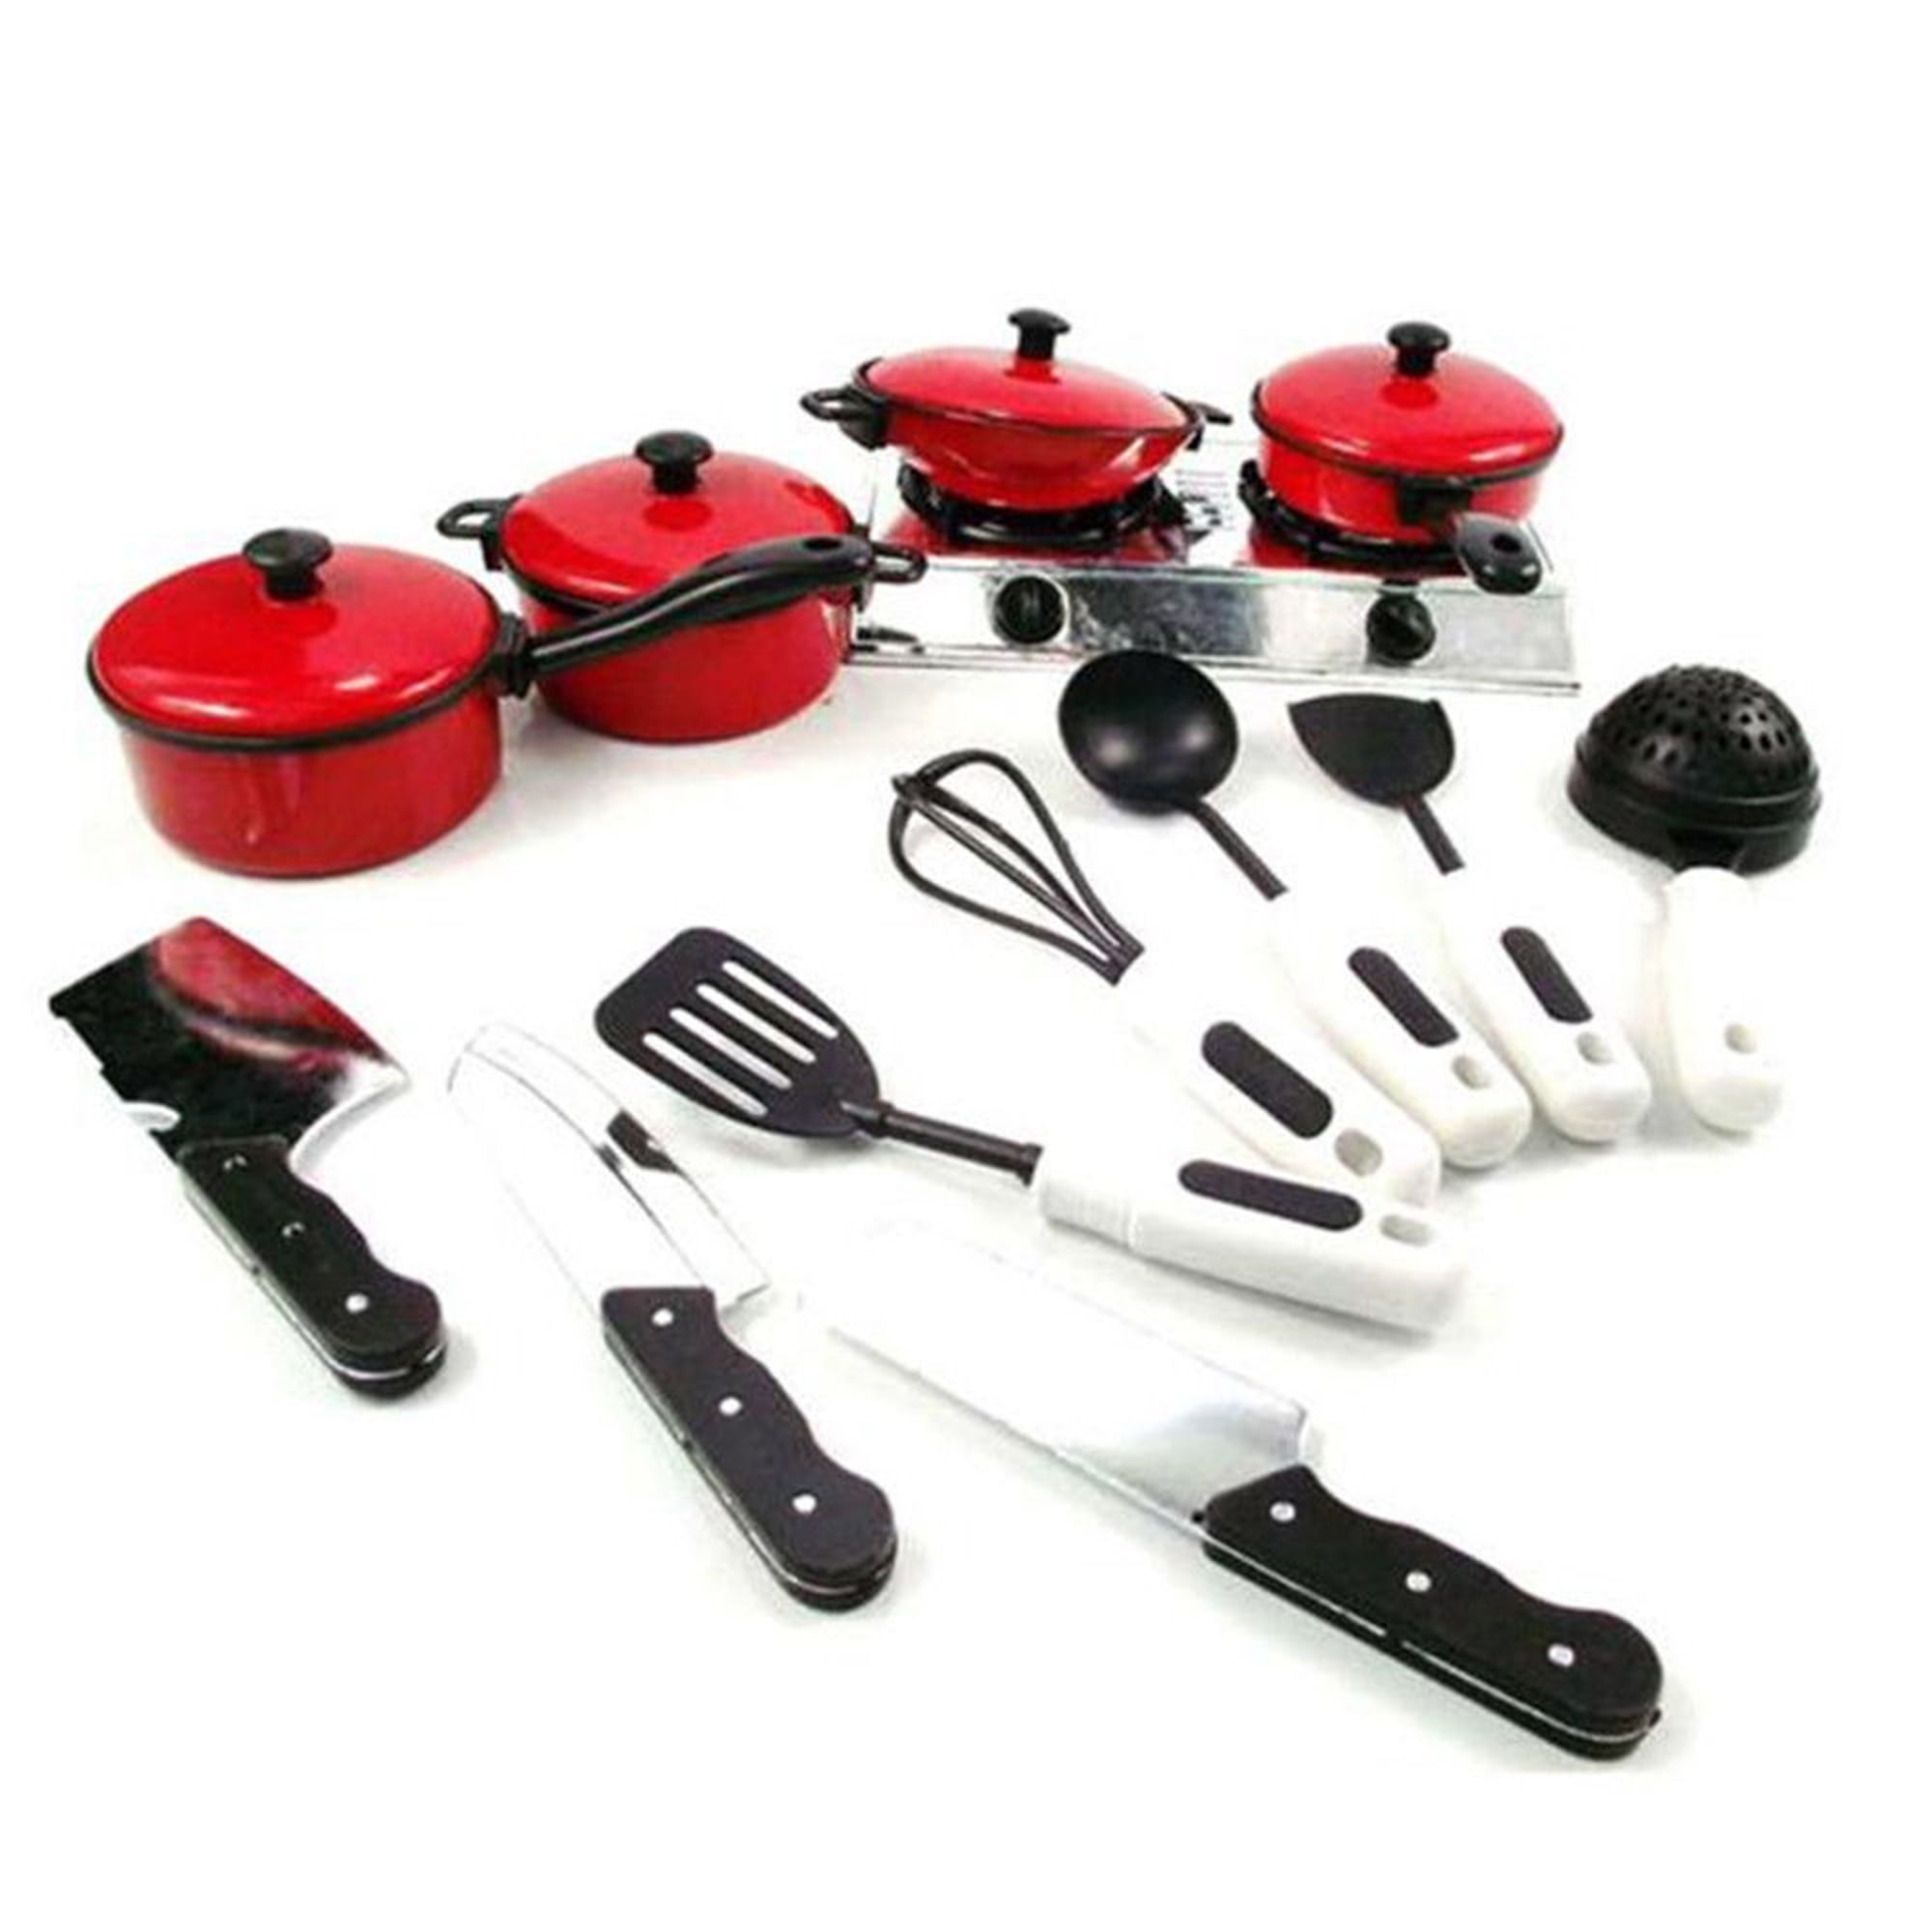 Details about   Children Kids Kitchen Utensils Pots Pans Play Toys Dishes Food Cook Cookin F5V8